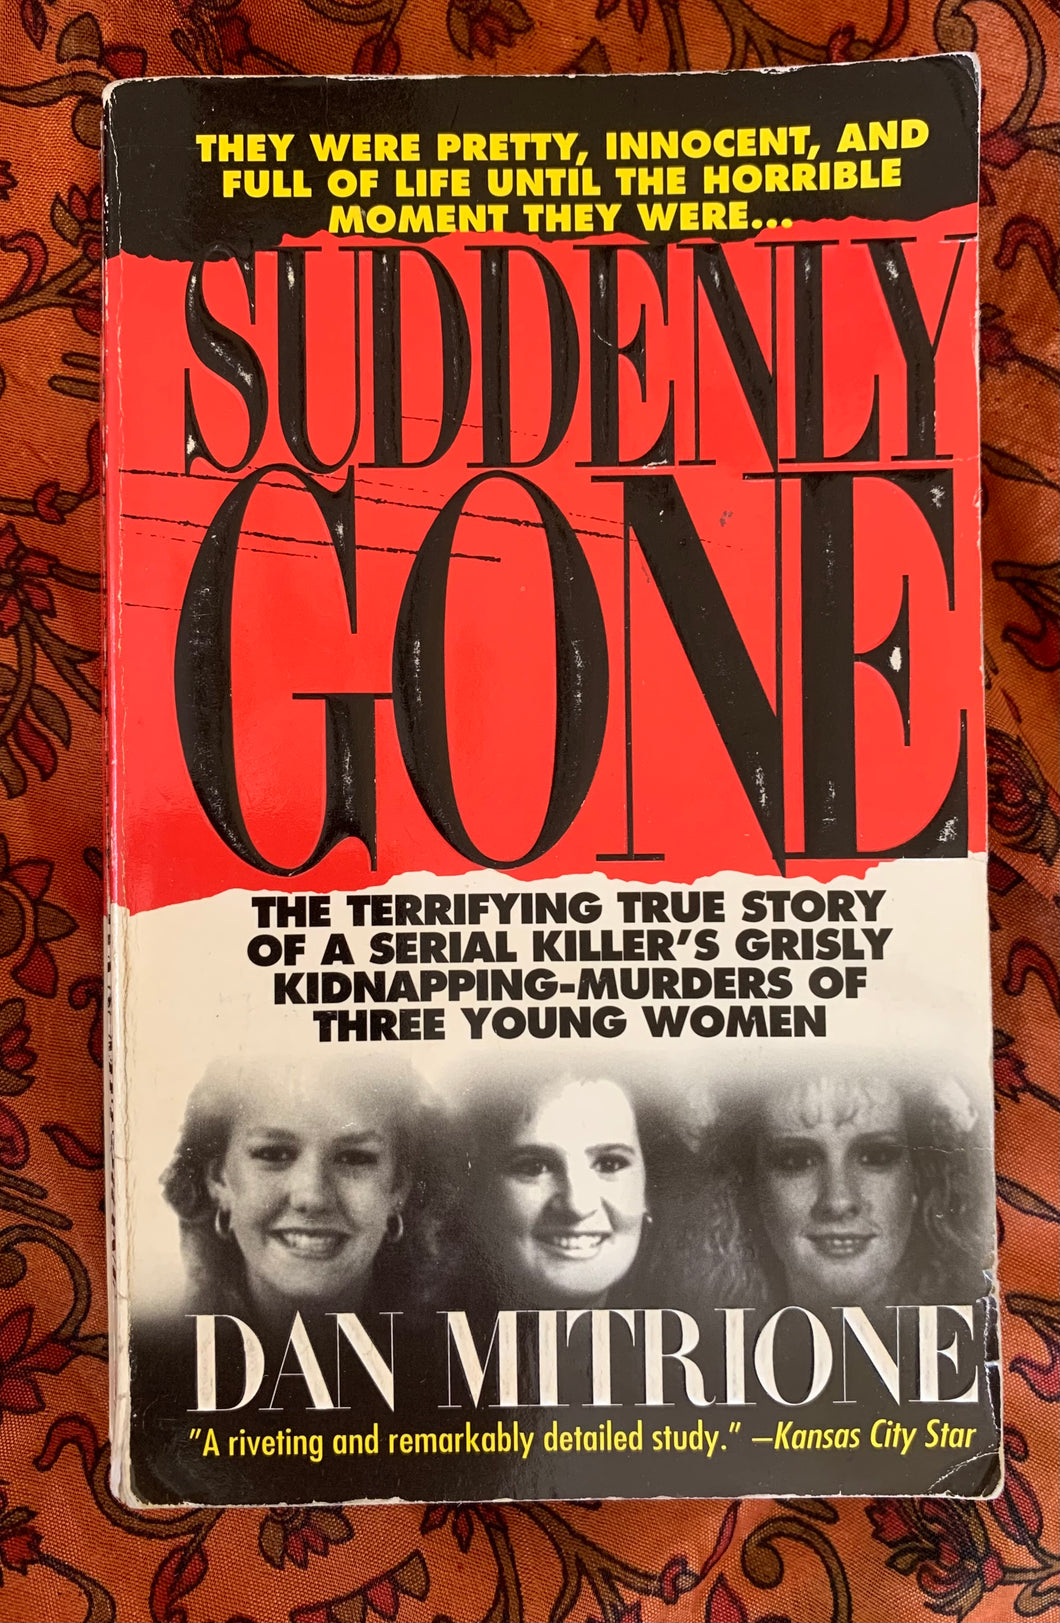 Suddenly Gone: The Terrifying True Story of a Serial Killer's Grisly Kidnapping-Murders of Three Young Women